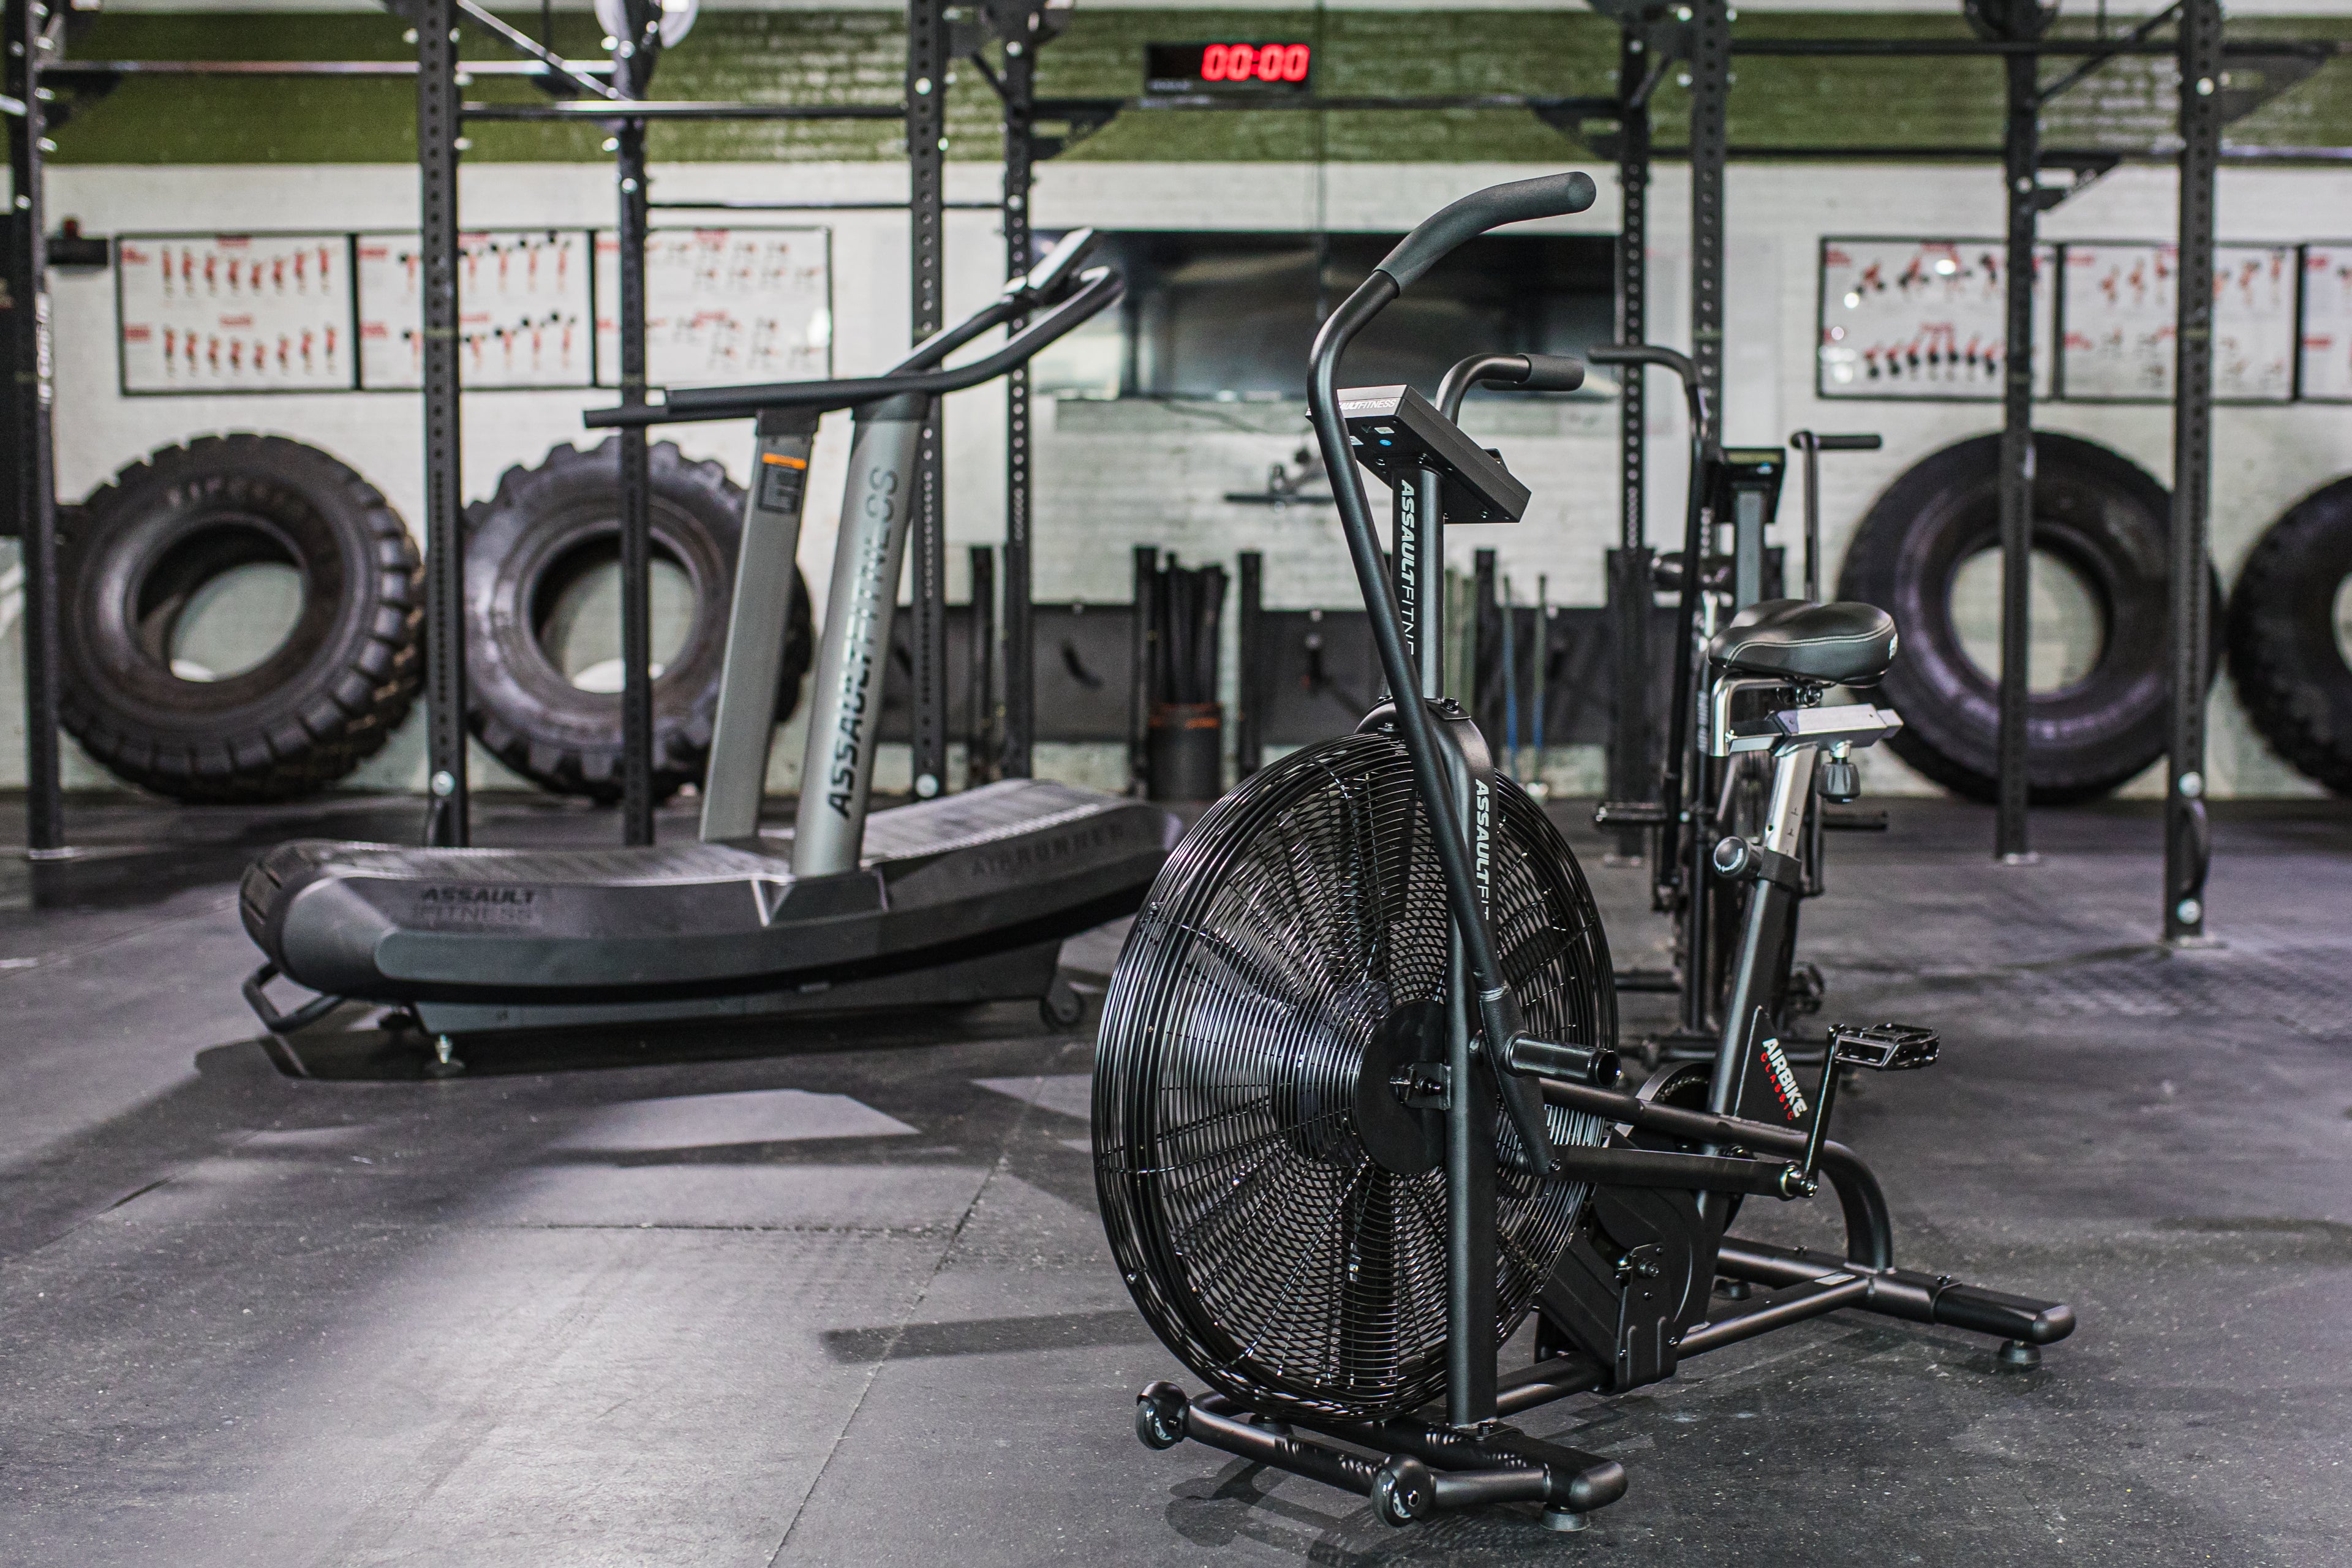 The assaultbike classic and assaultrunner positioned at an angle among other fitness equipment in a gym